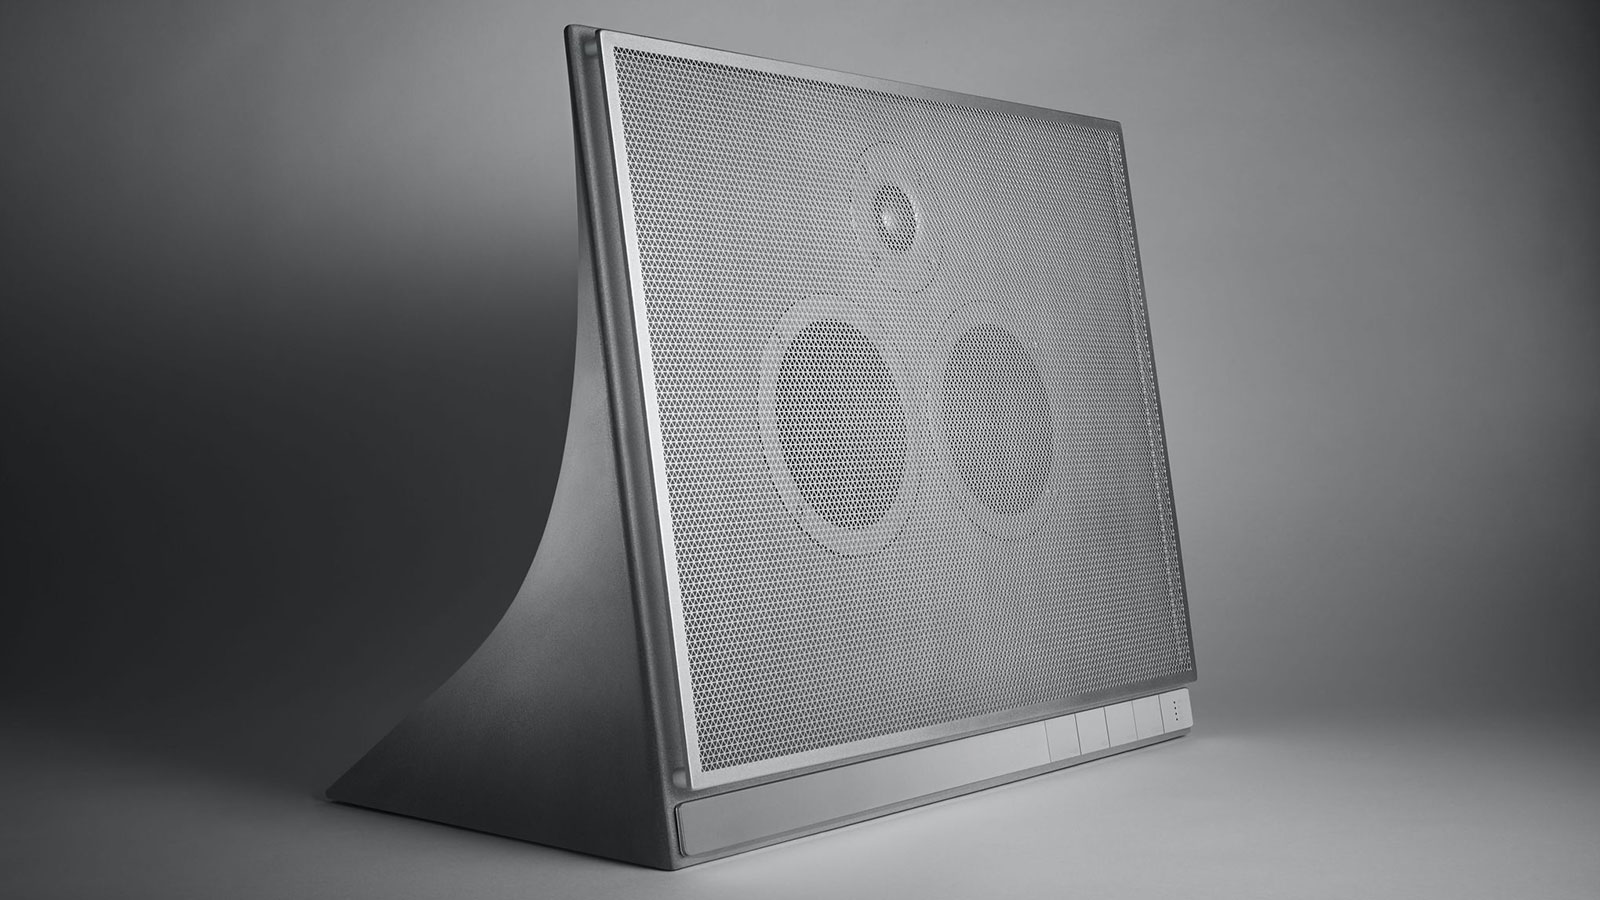 MASTER & DYNAMICS MA770 WIRELESS SPEAKER IS MADE FROM CONCRETE